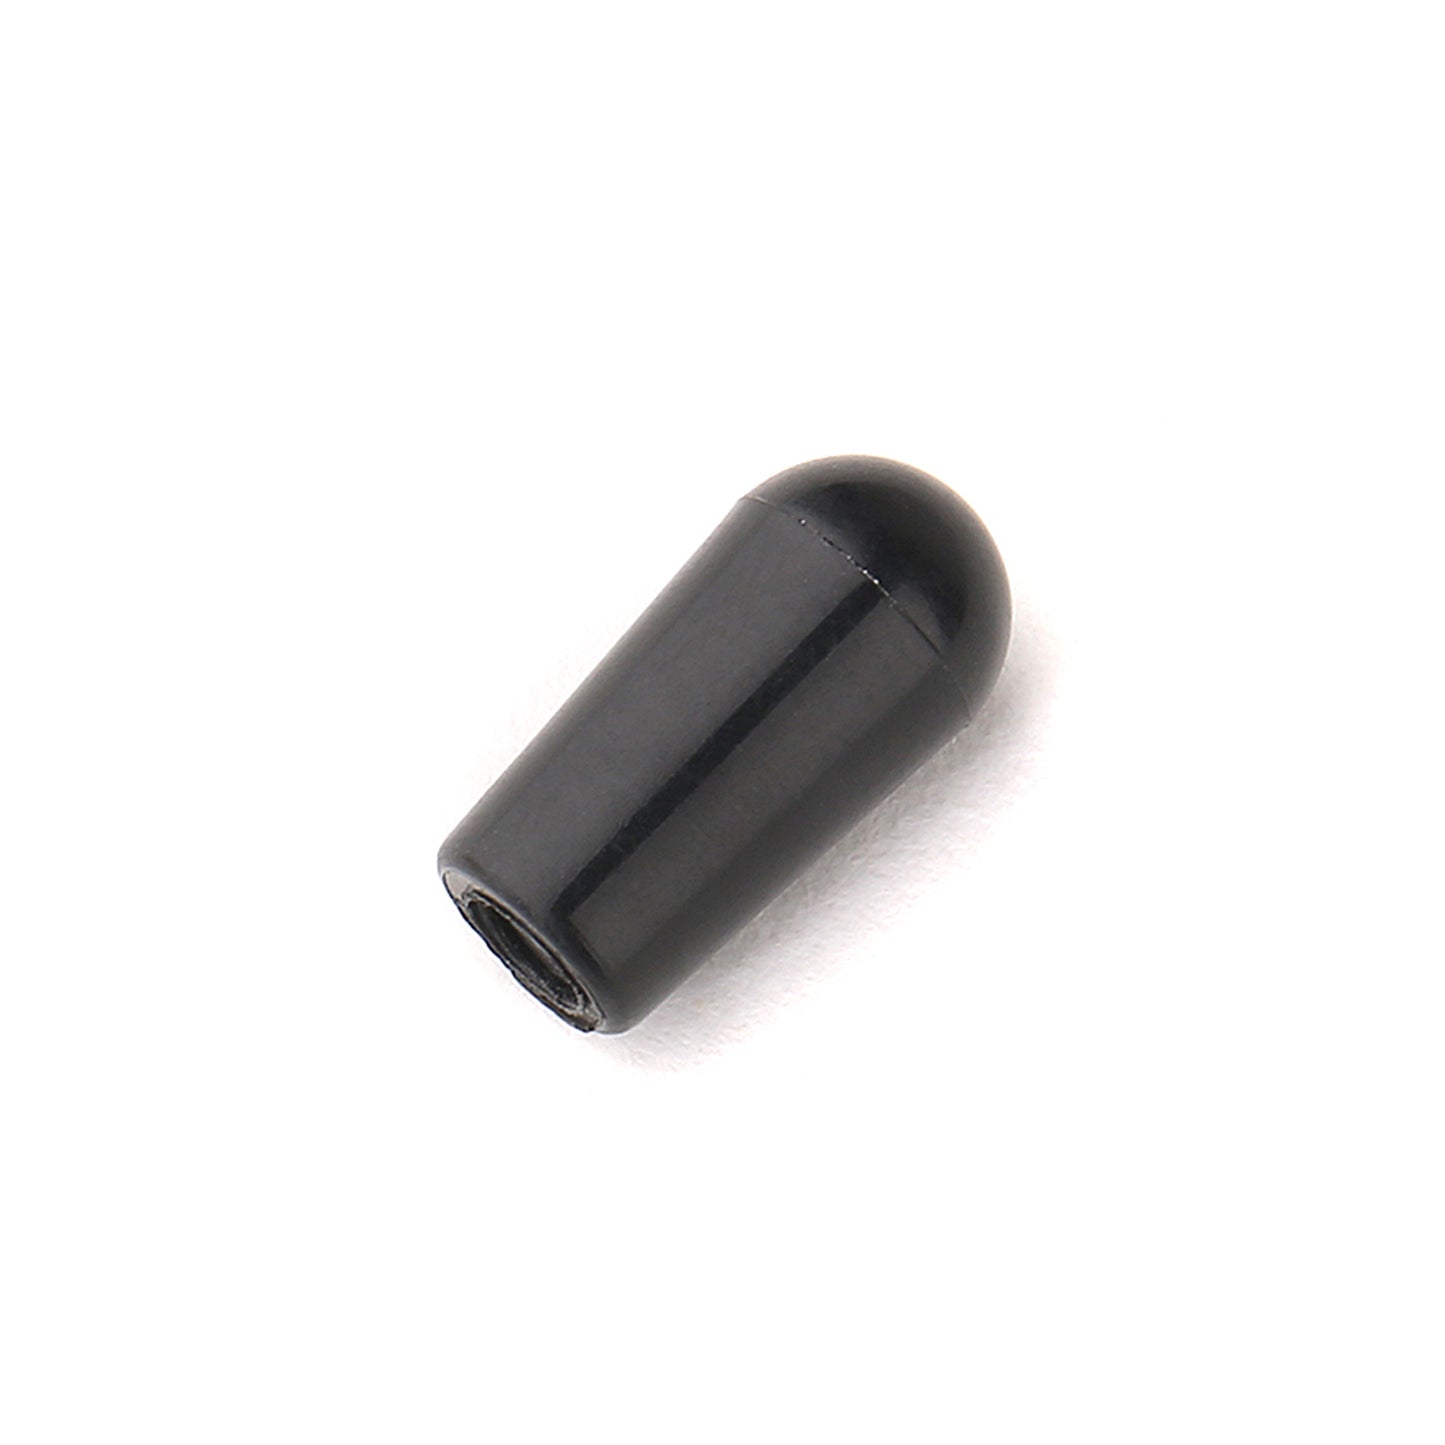 Musiclily Metric 3 Way Guitar Toggle Switch Tips,Black (5 Pieces)